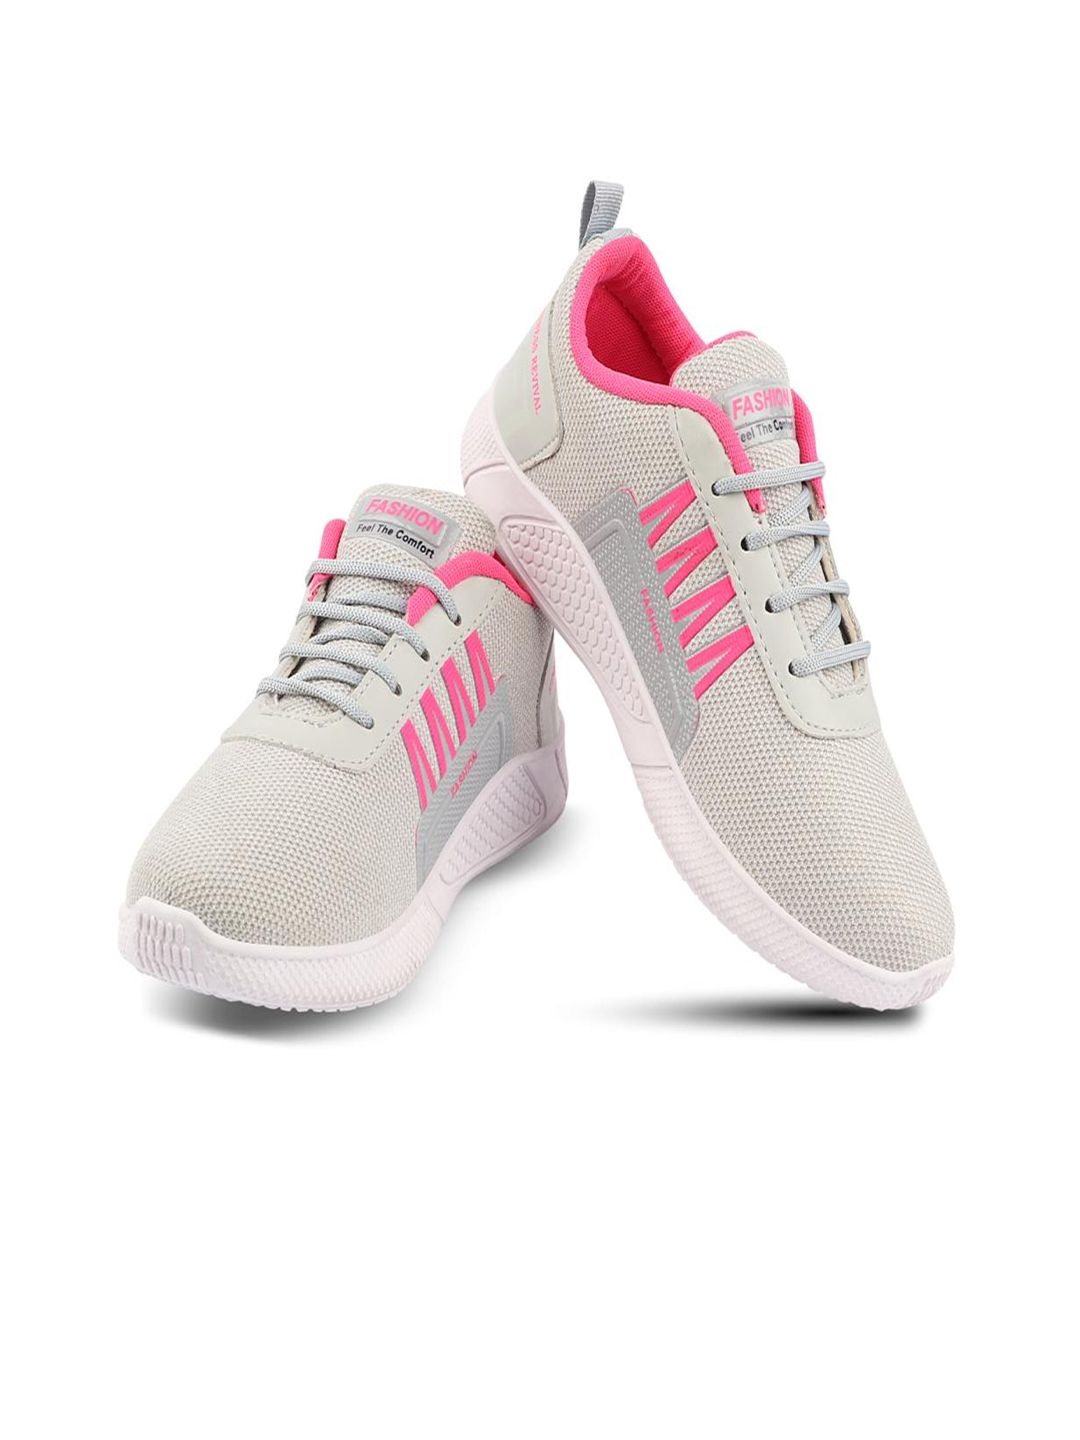 BEONZA Women Grey Mesh Running Non-Marking Shoes Price in India